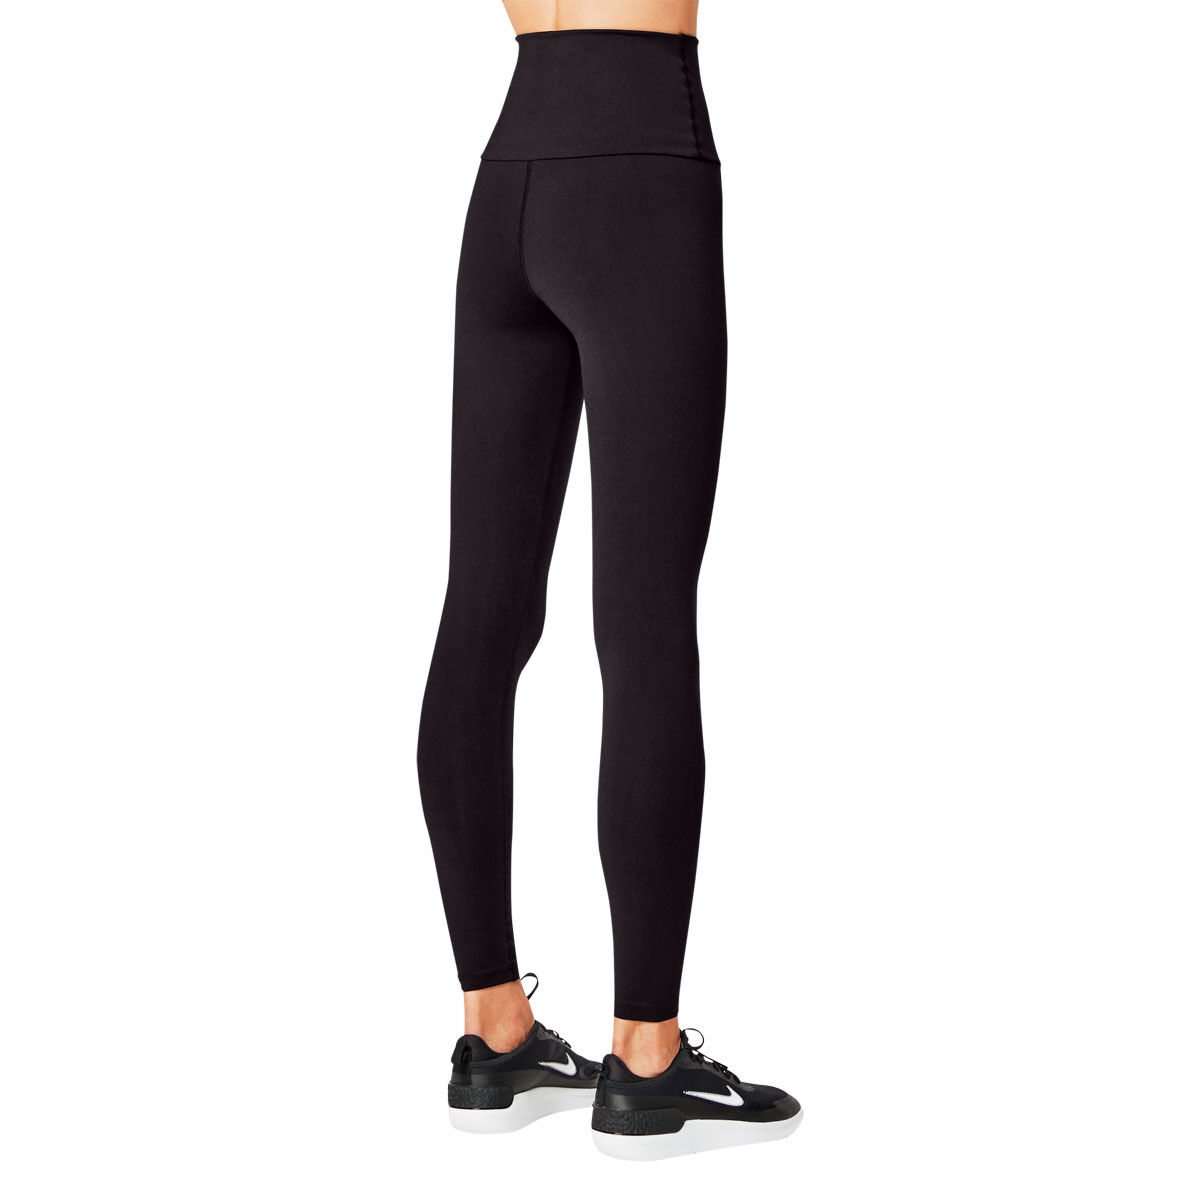 Running Bare Leggings Womens 4/6 Sports Compression USA Workout